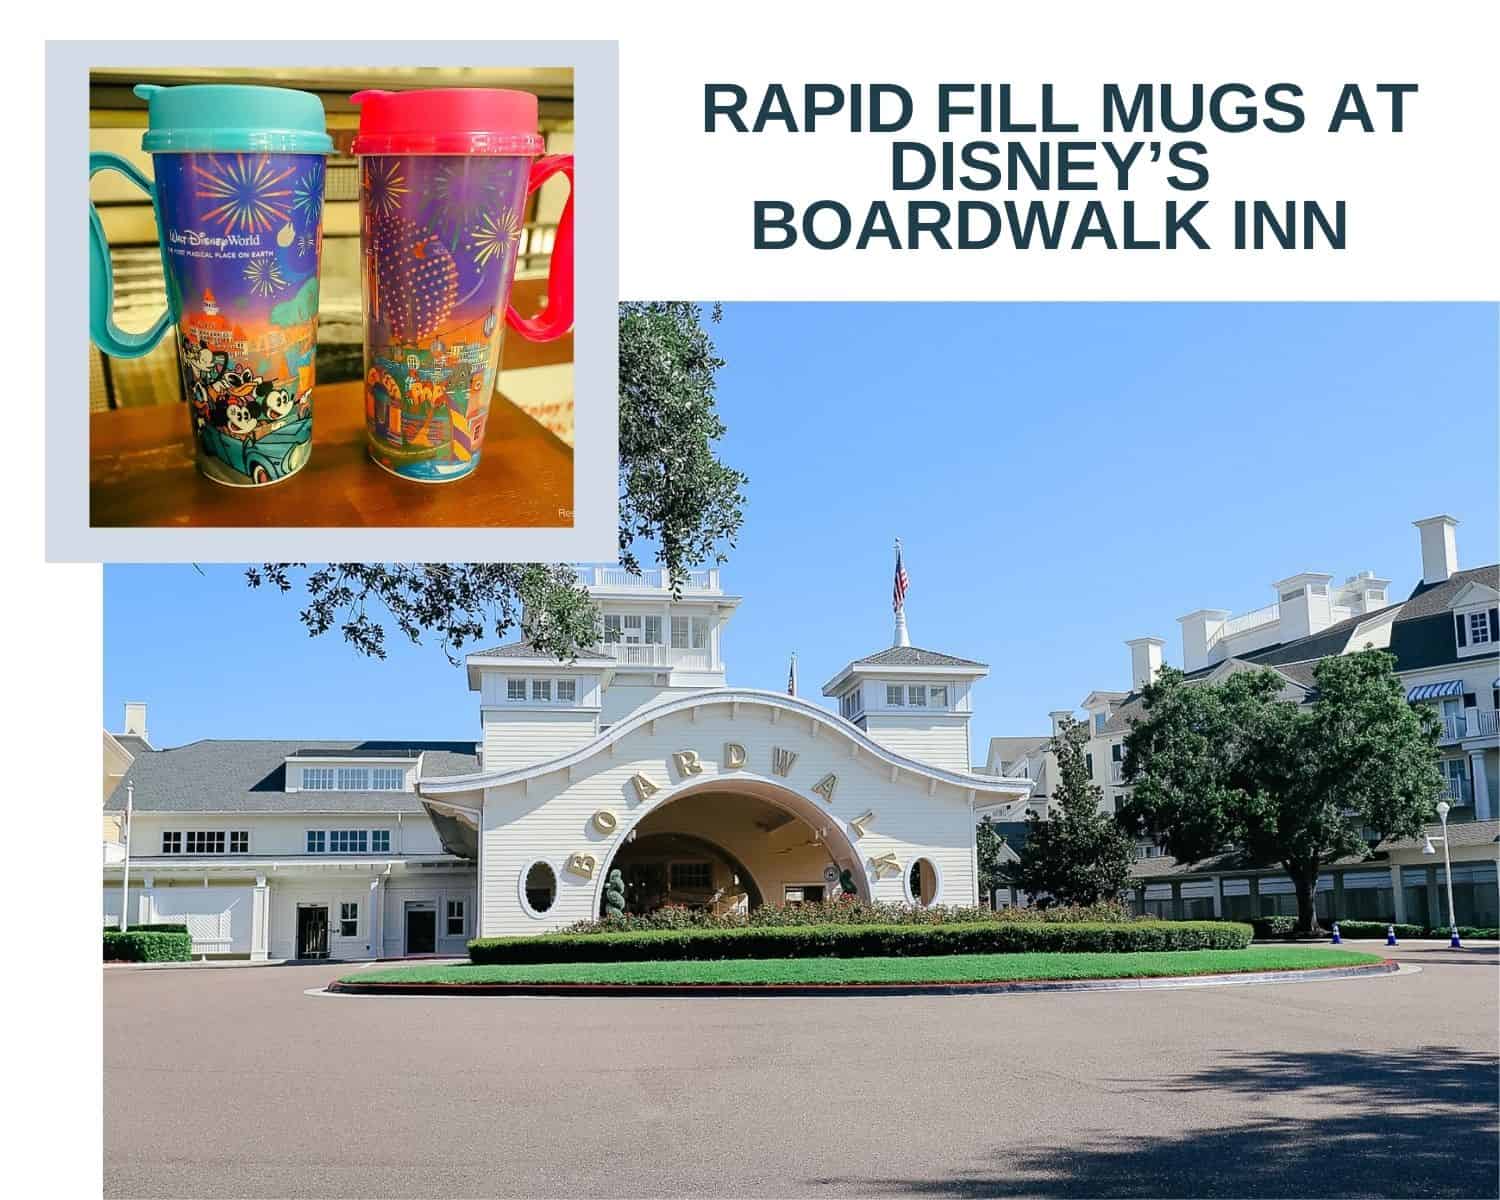 Where to Refill Rapid Fill Mugs at Disneys Boardwalk Inn (with Drink Options)